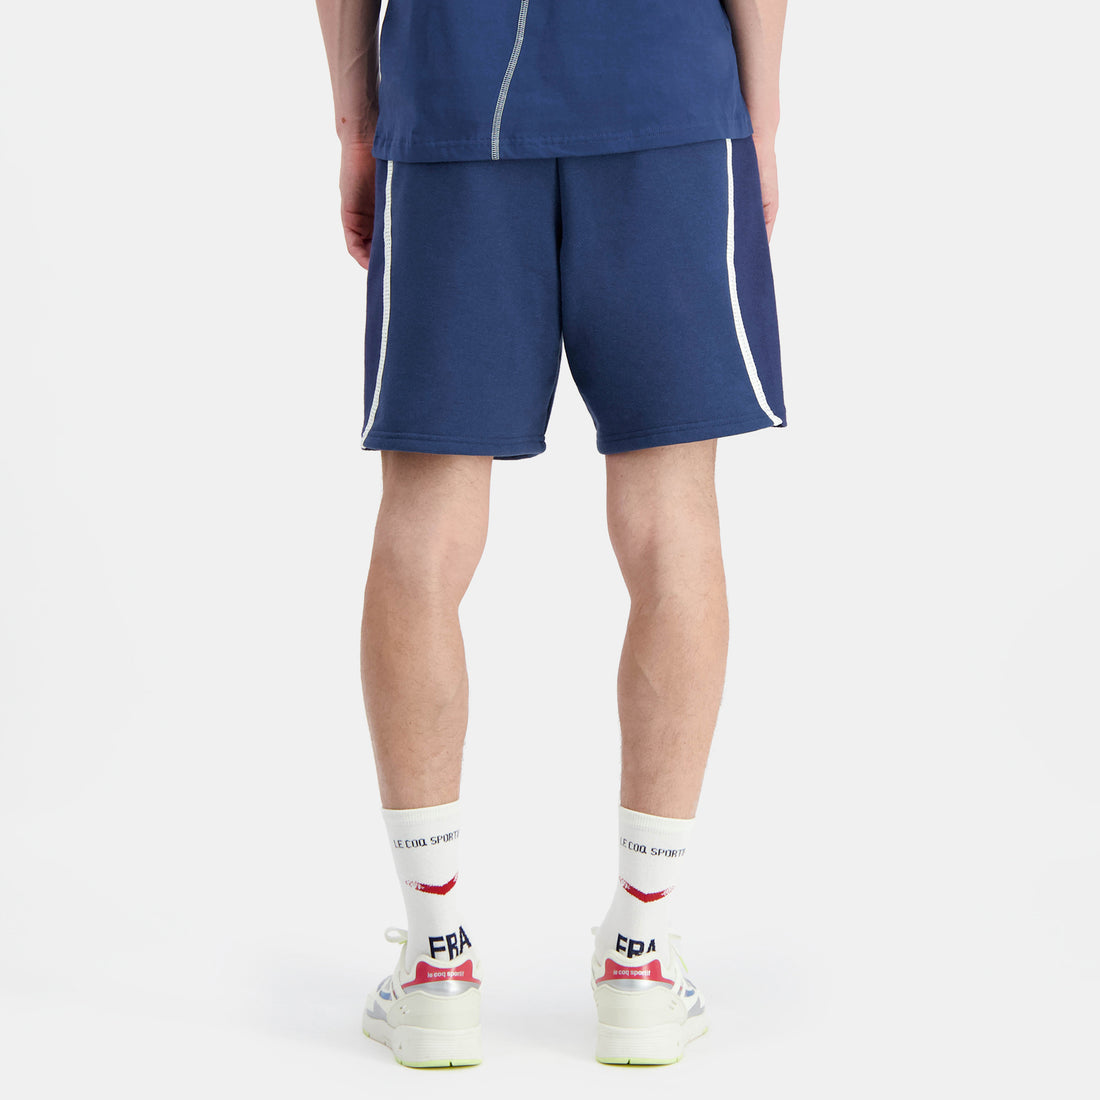 2410377-EFRO 24 Short N°3 M insignia blue  | Shorts for men